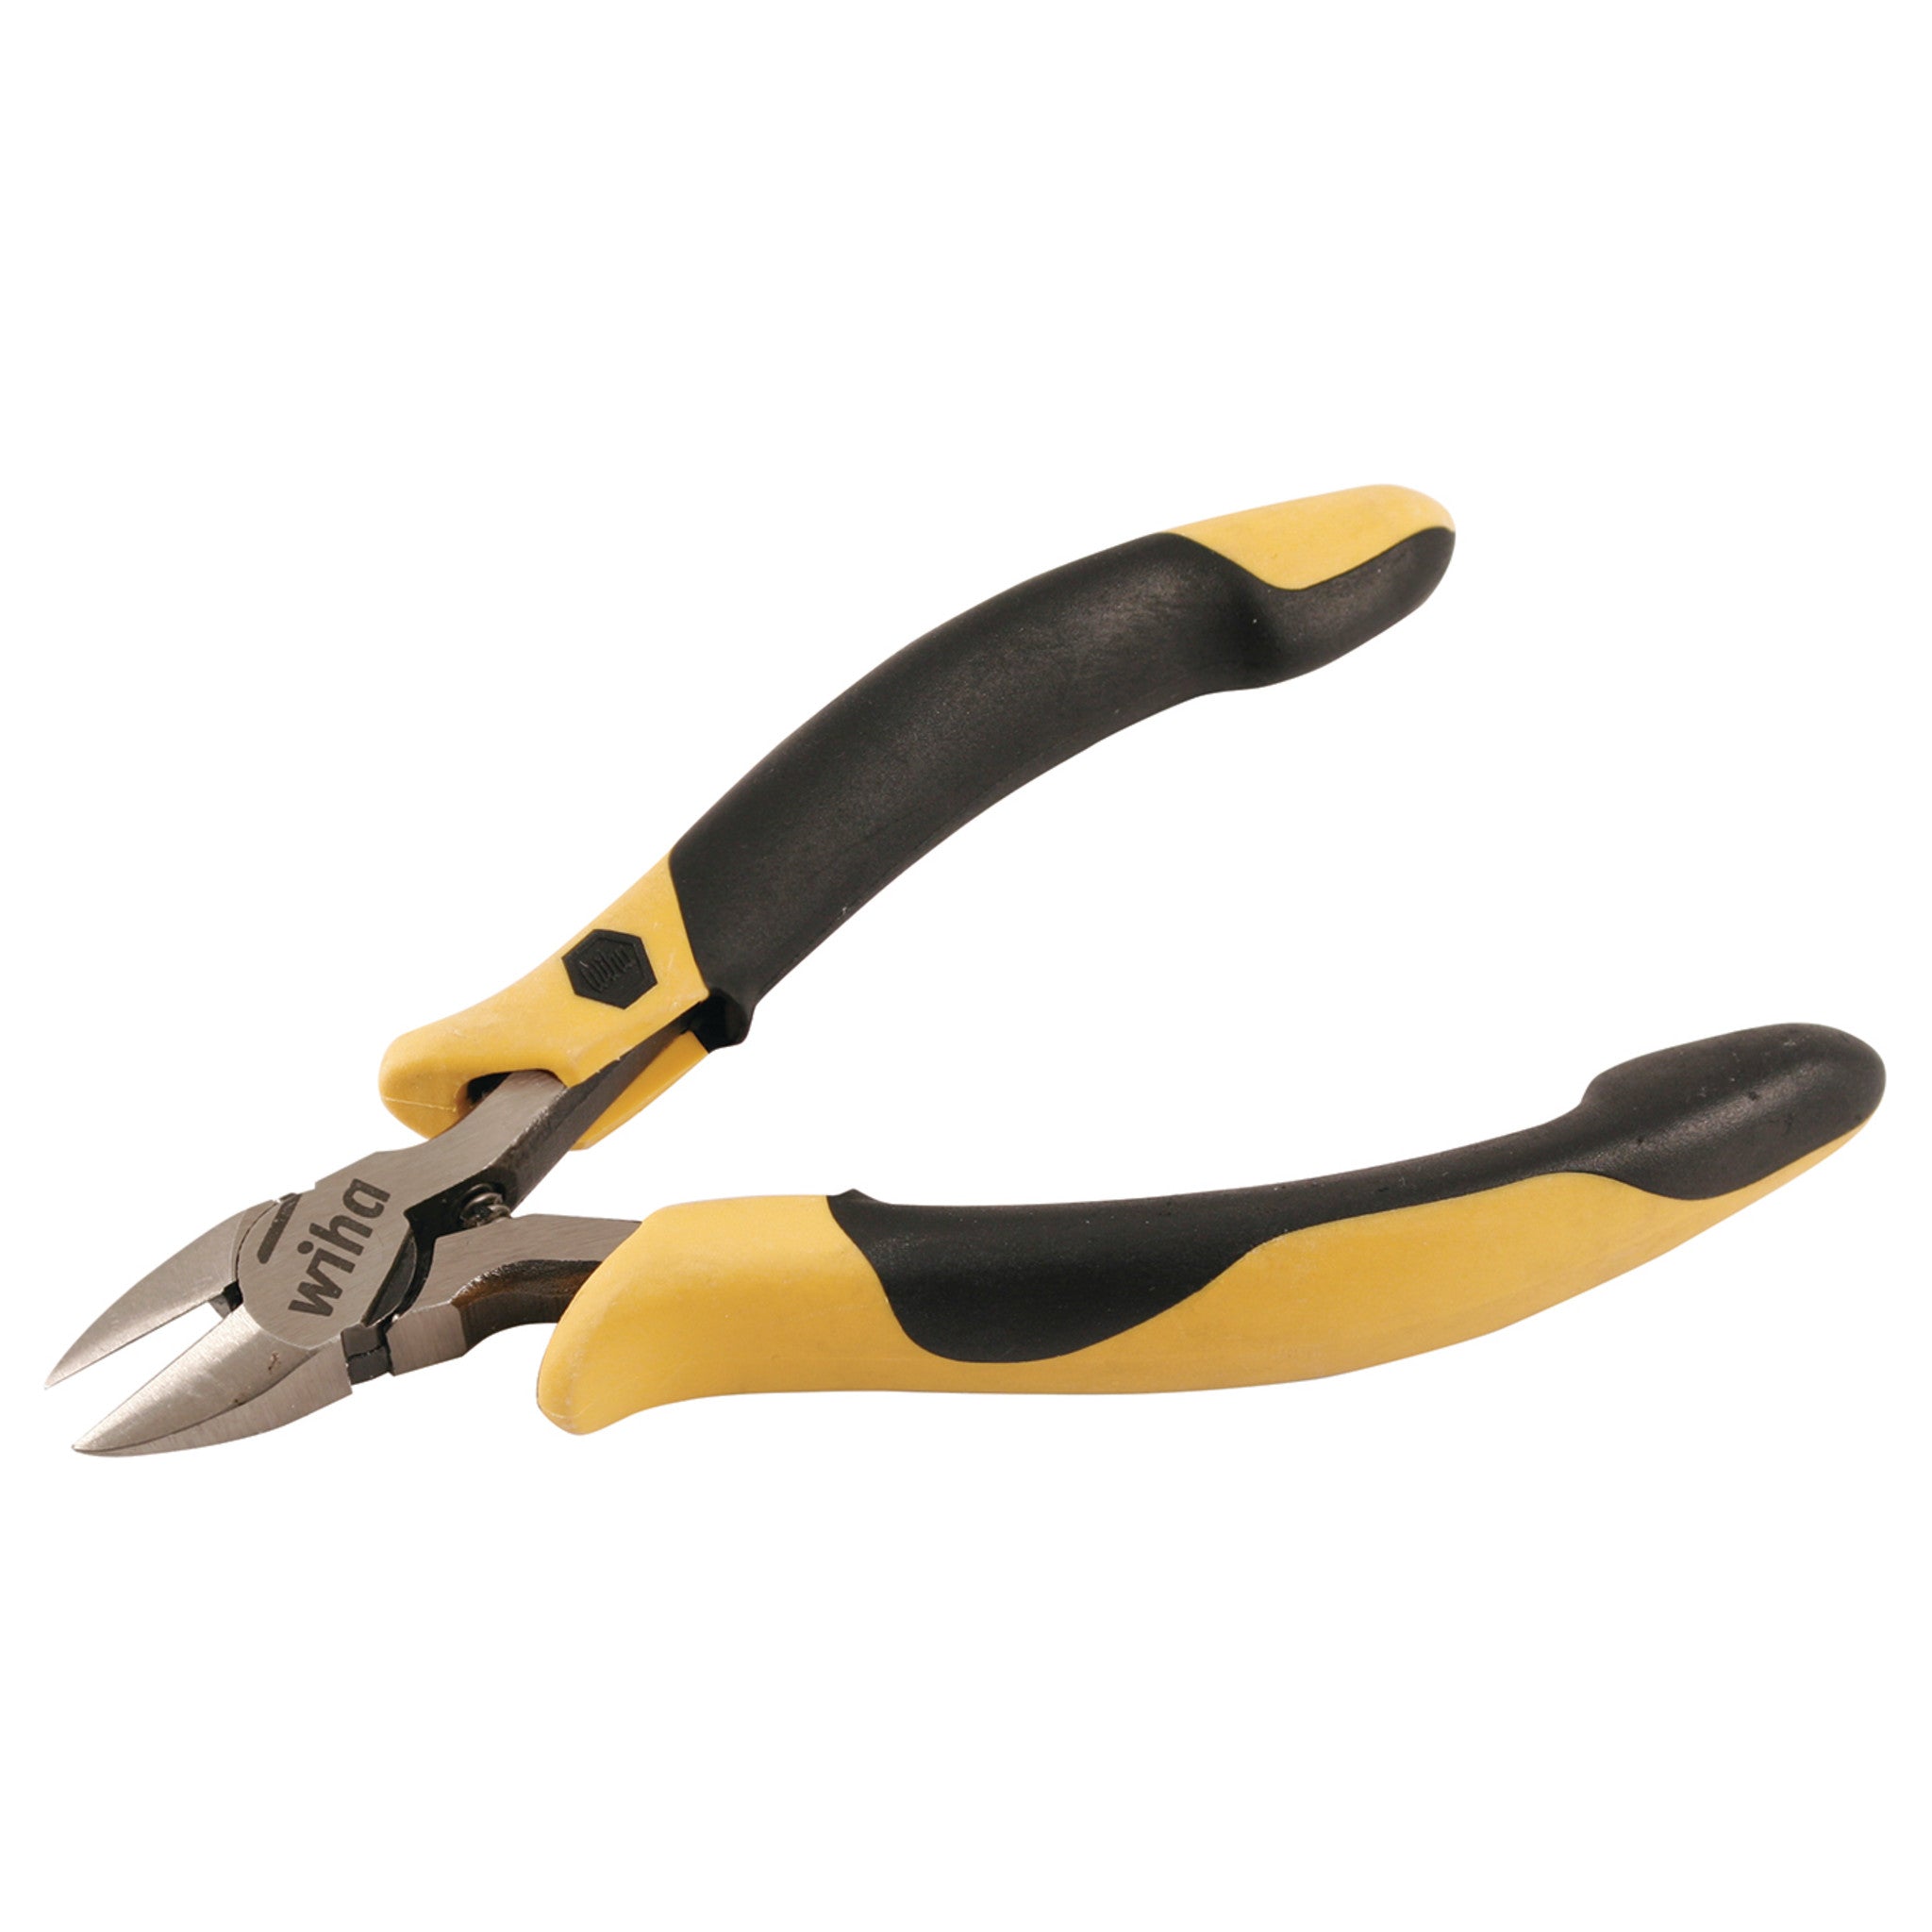 Flush Wire Cutters - Capital City Beads